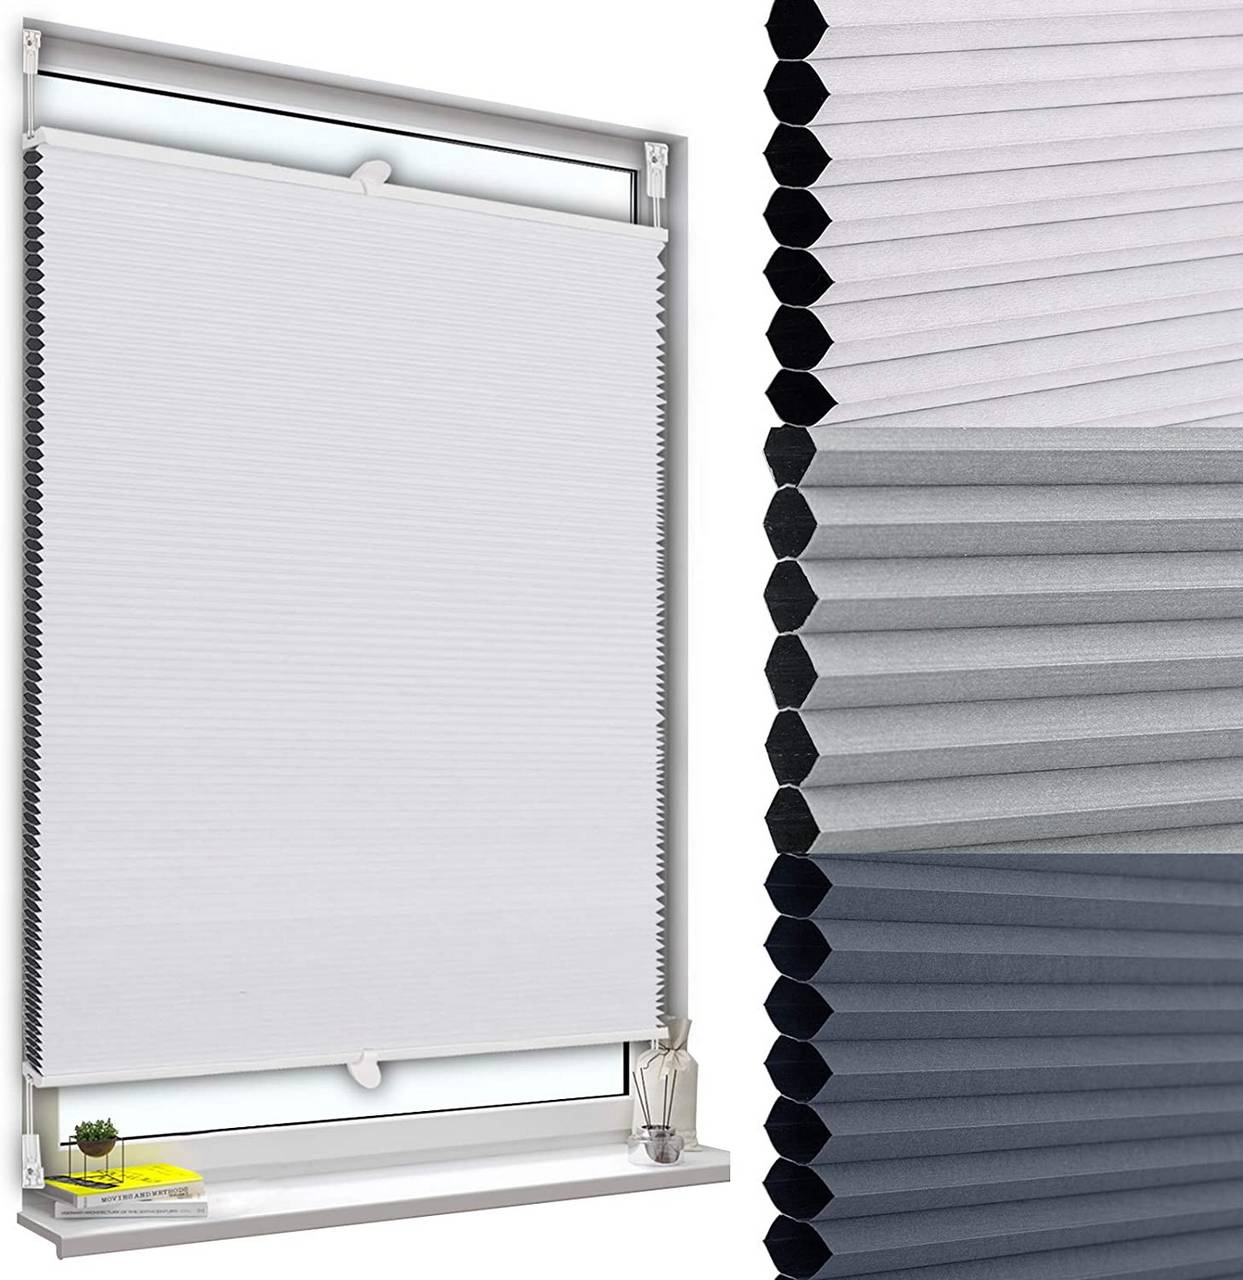 Lichtblick Klemmfix Pleated Blind without Drilling with Clip Polyester 65 x 130 cm Weiß